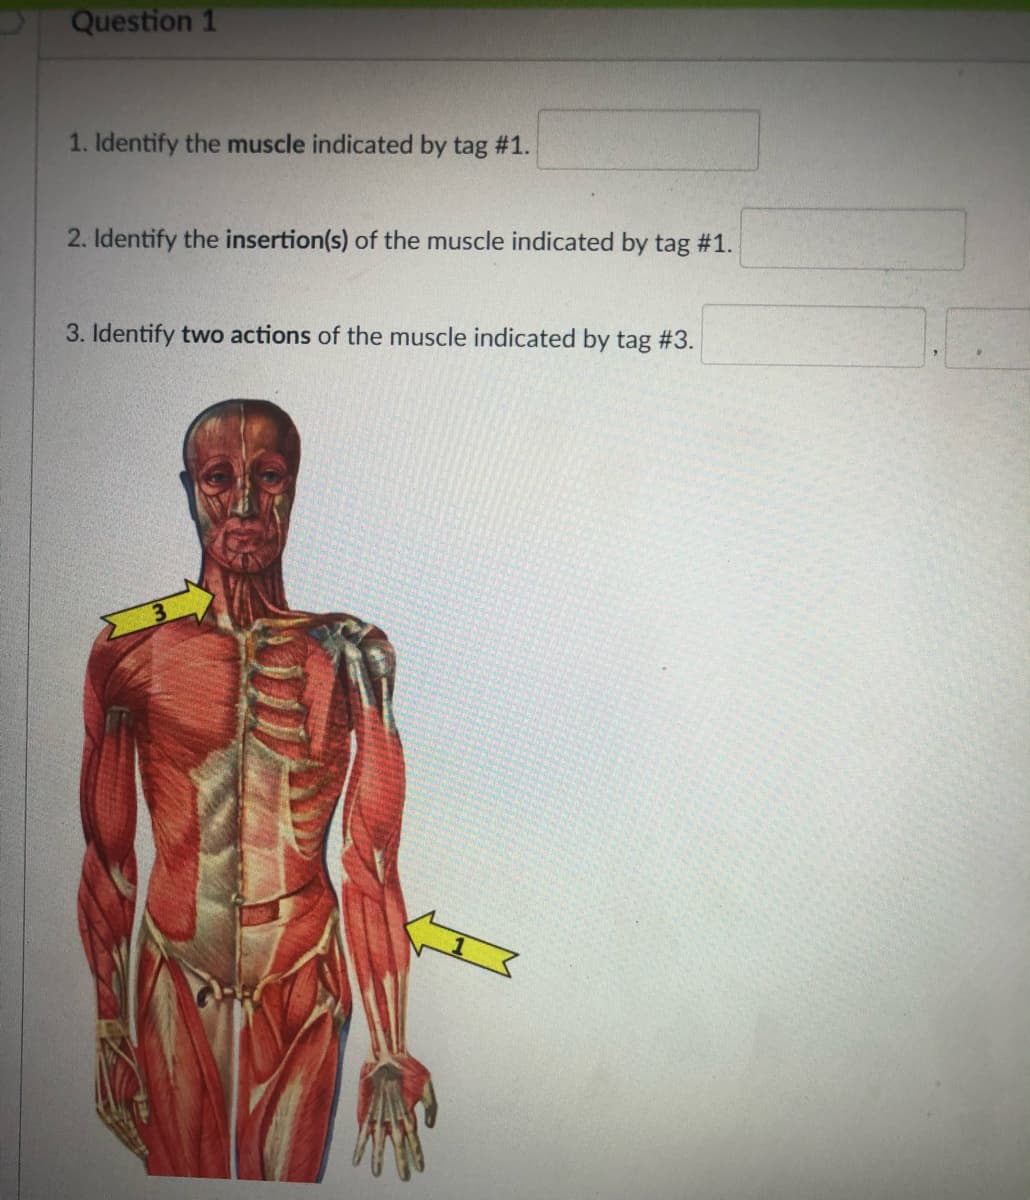 Question 1
1. Identify the muscle indicated by tag # 1.
2. Identify the insertion(s) of the muscle indicated by tag #1.
3. Identify two actions of the muscle indicated by tag #3.
